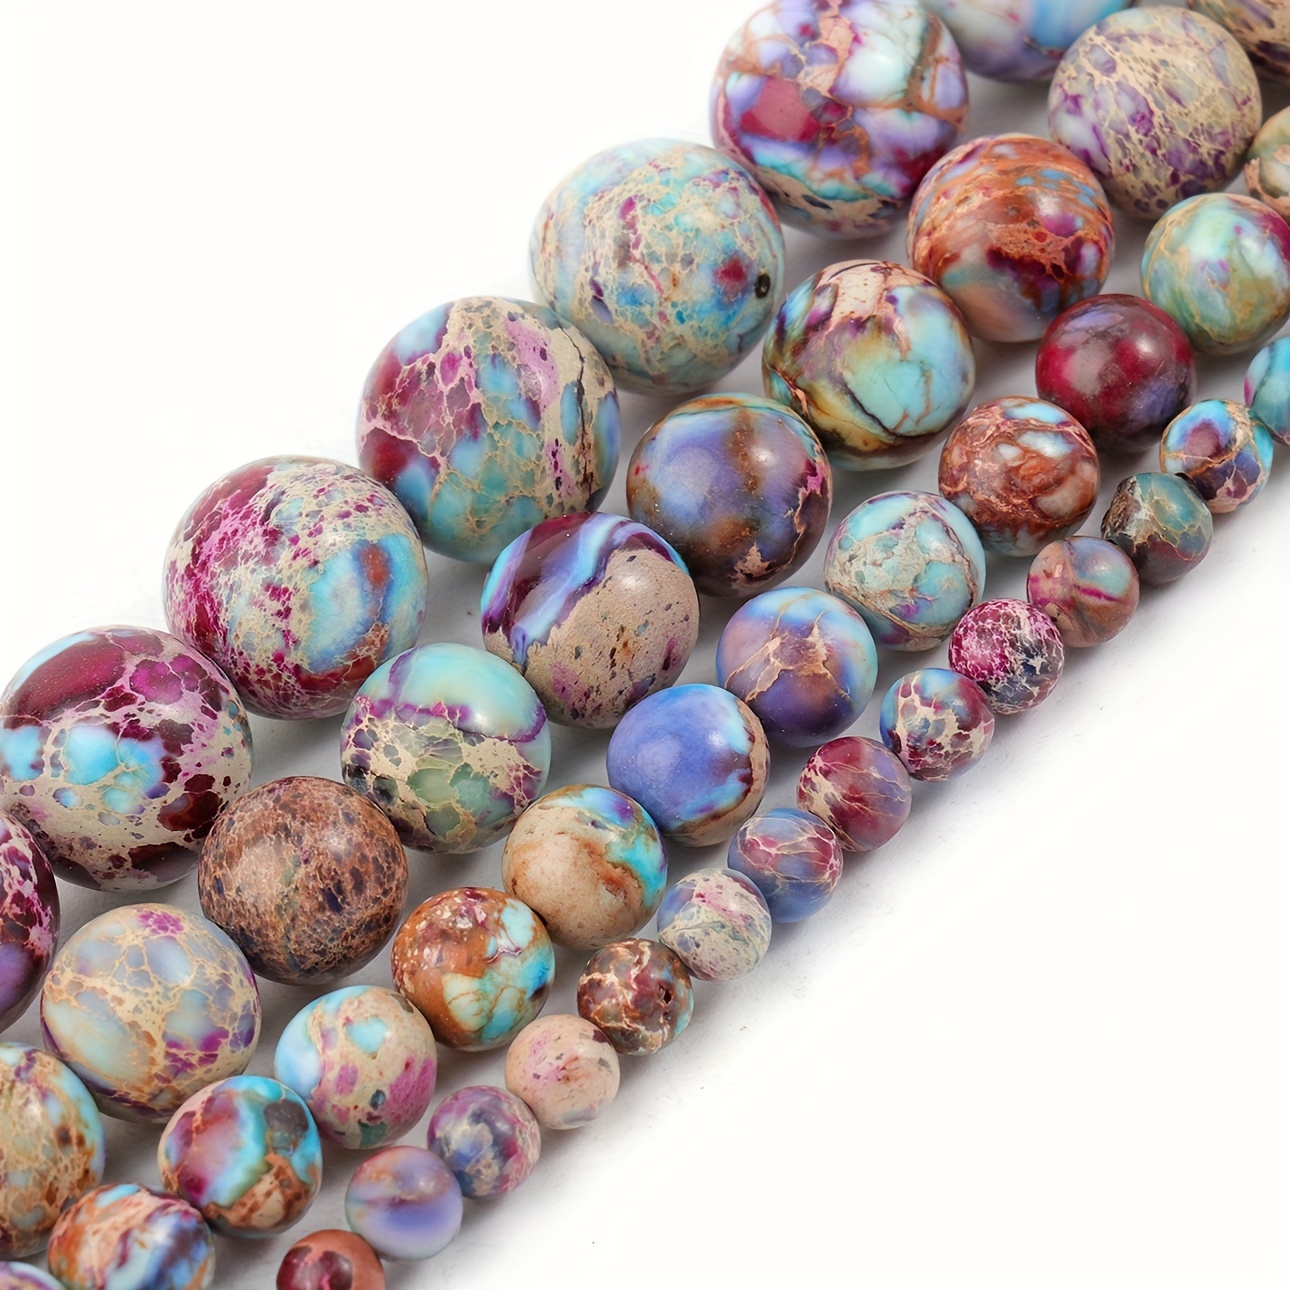 

4-10mm Natural Stone Purple Colorful Sea Sediment Jasper High Quality Loose Spacer Beads For Jewelry Making Diy Special Unique Fashion Bracelets Necklace Women Gifts Craft Supplies